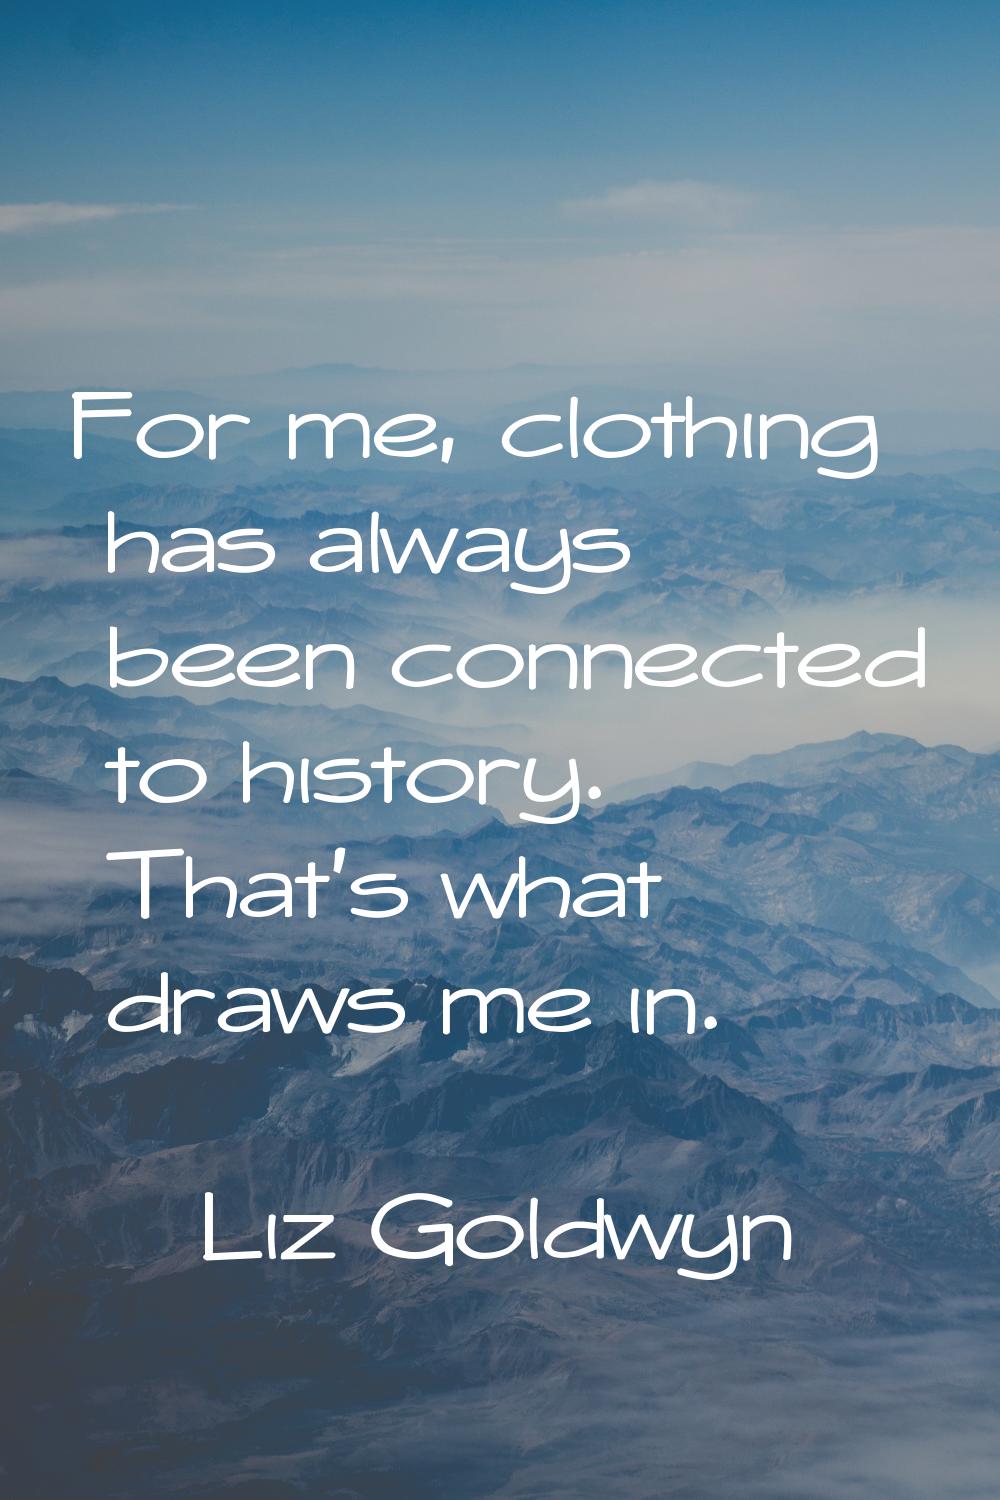 For me, clothing has always been connected to history. That's what draws me in.